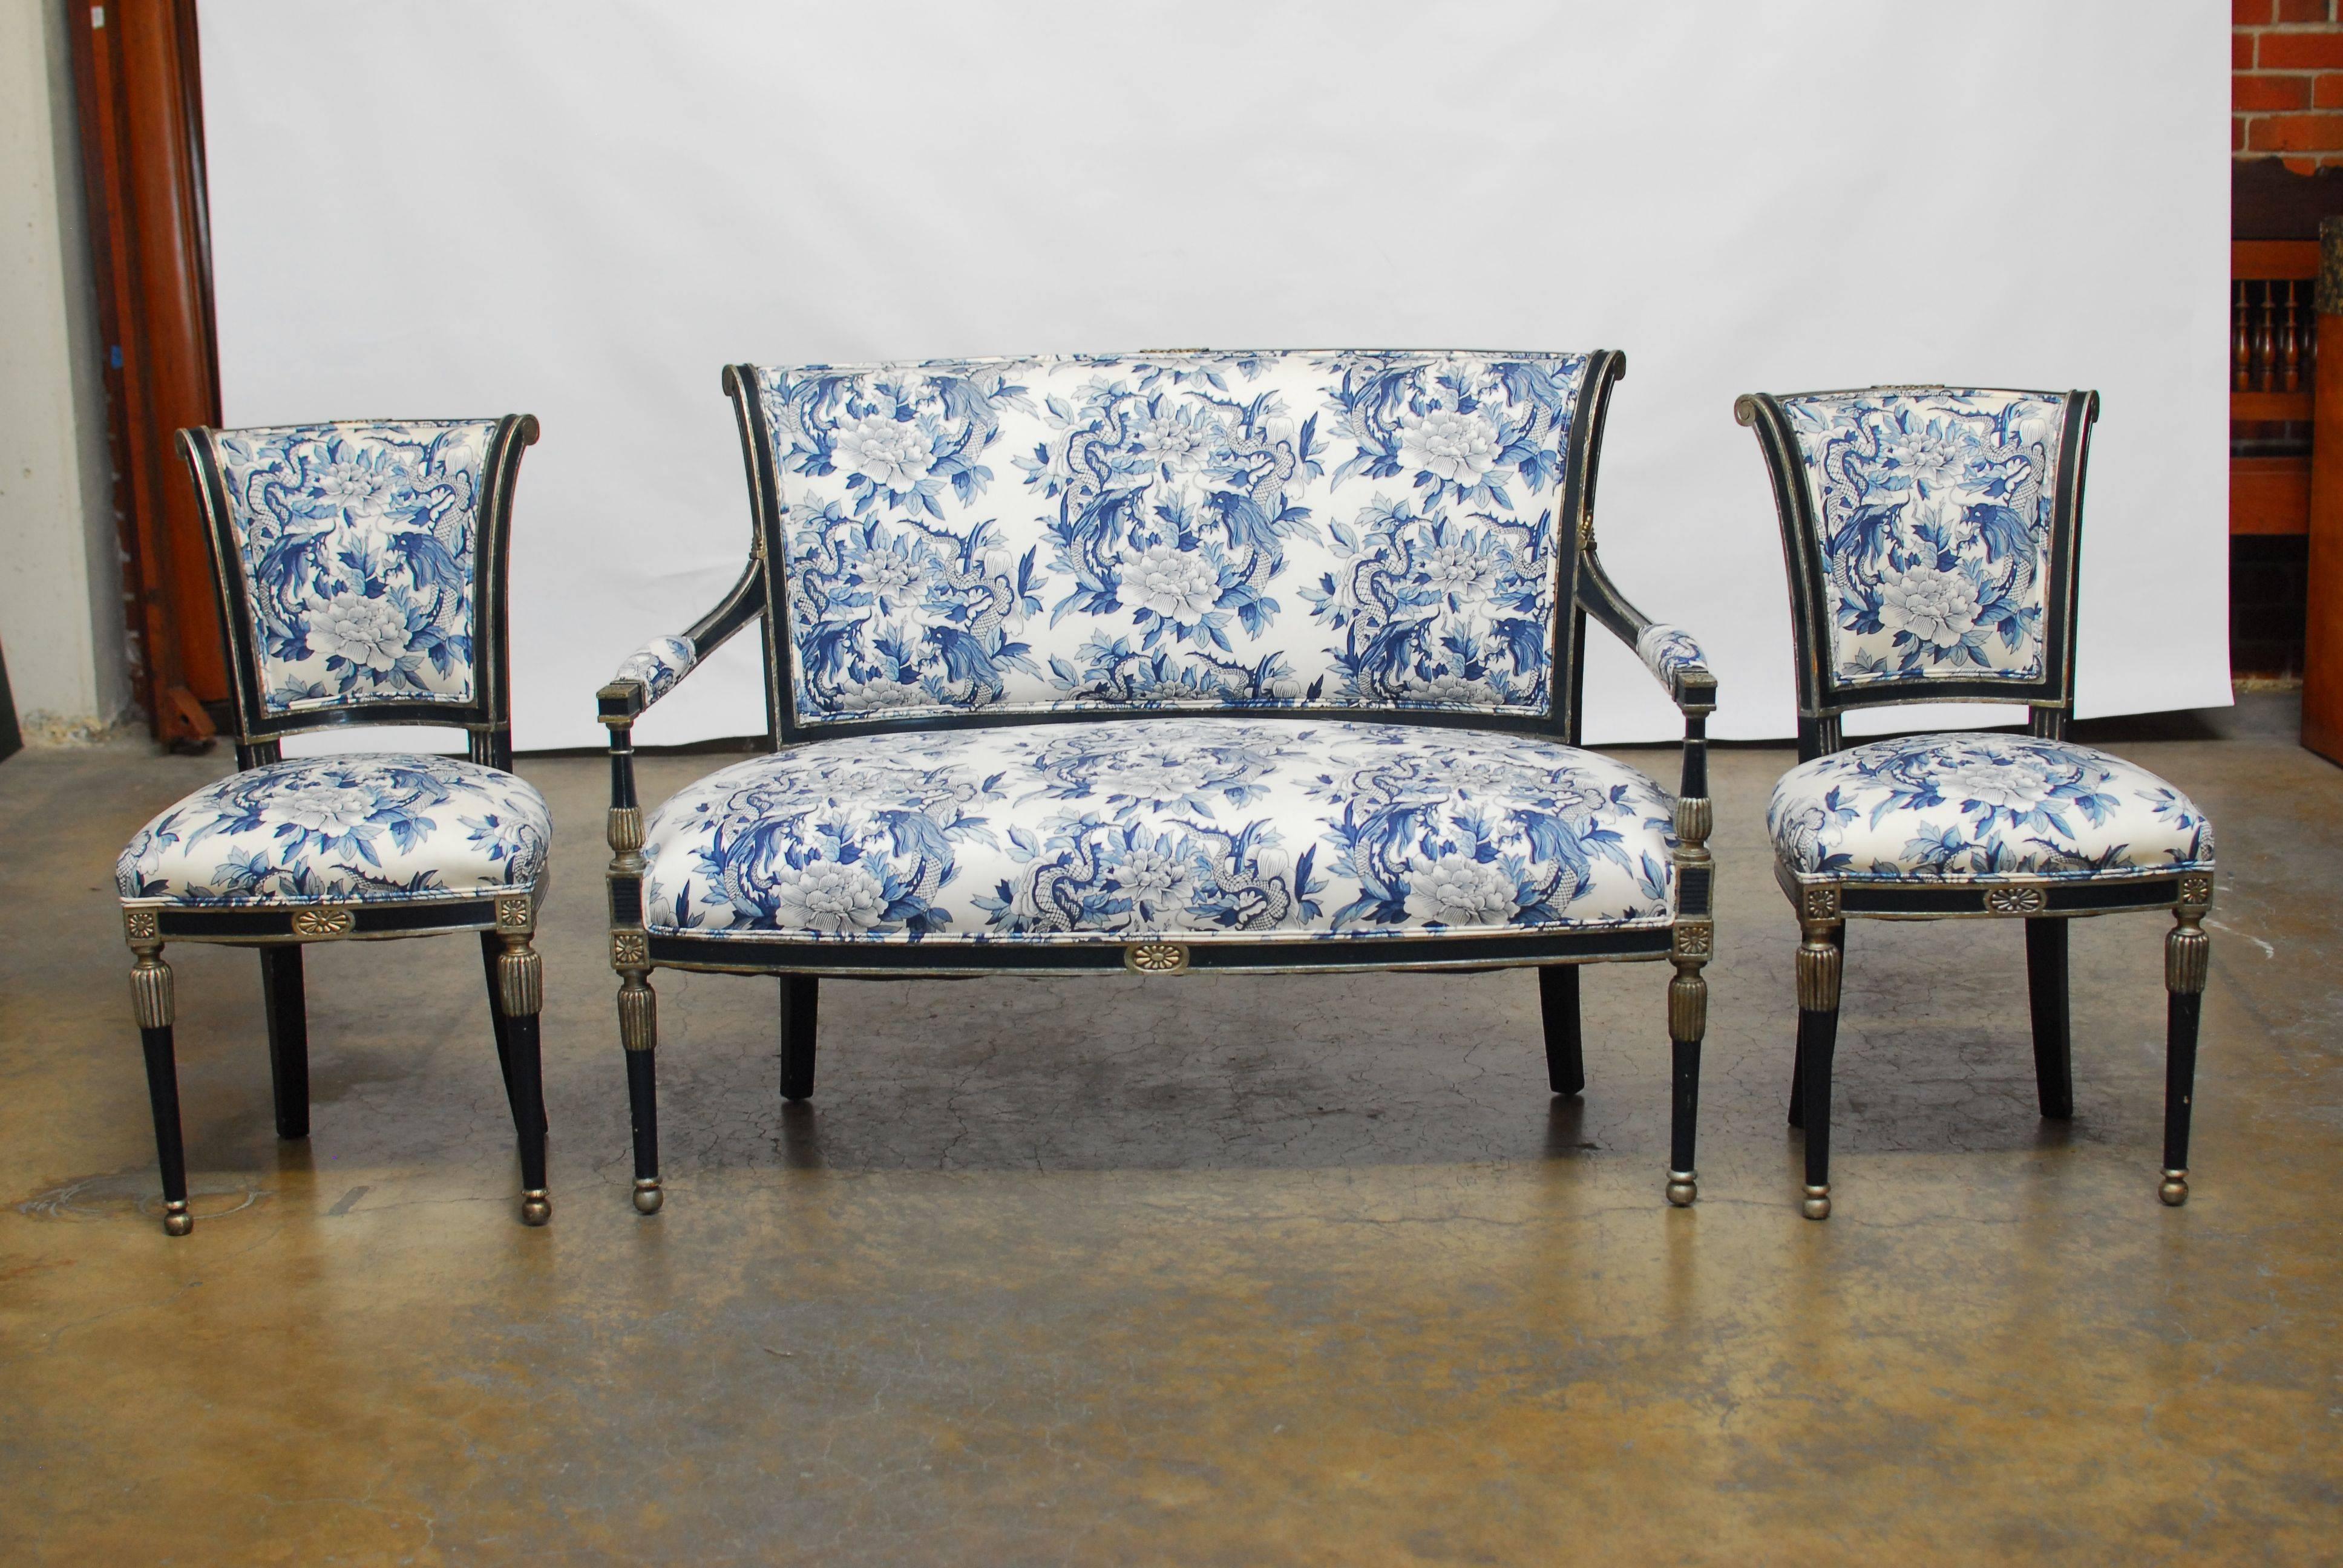 French Directoire Style Chairs with Chinoiserie Dragon Upholstery 6